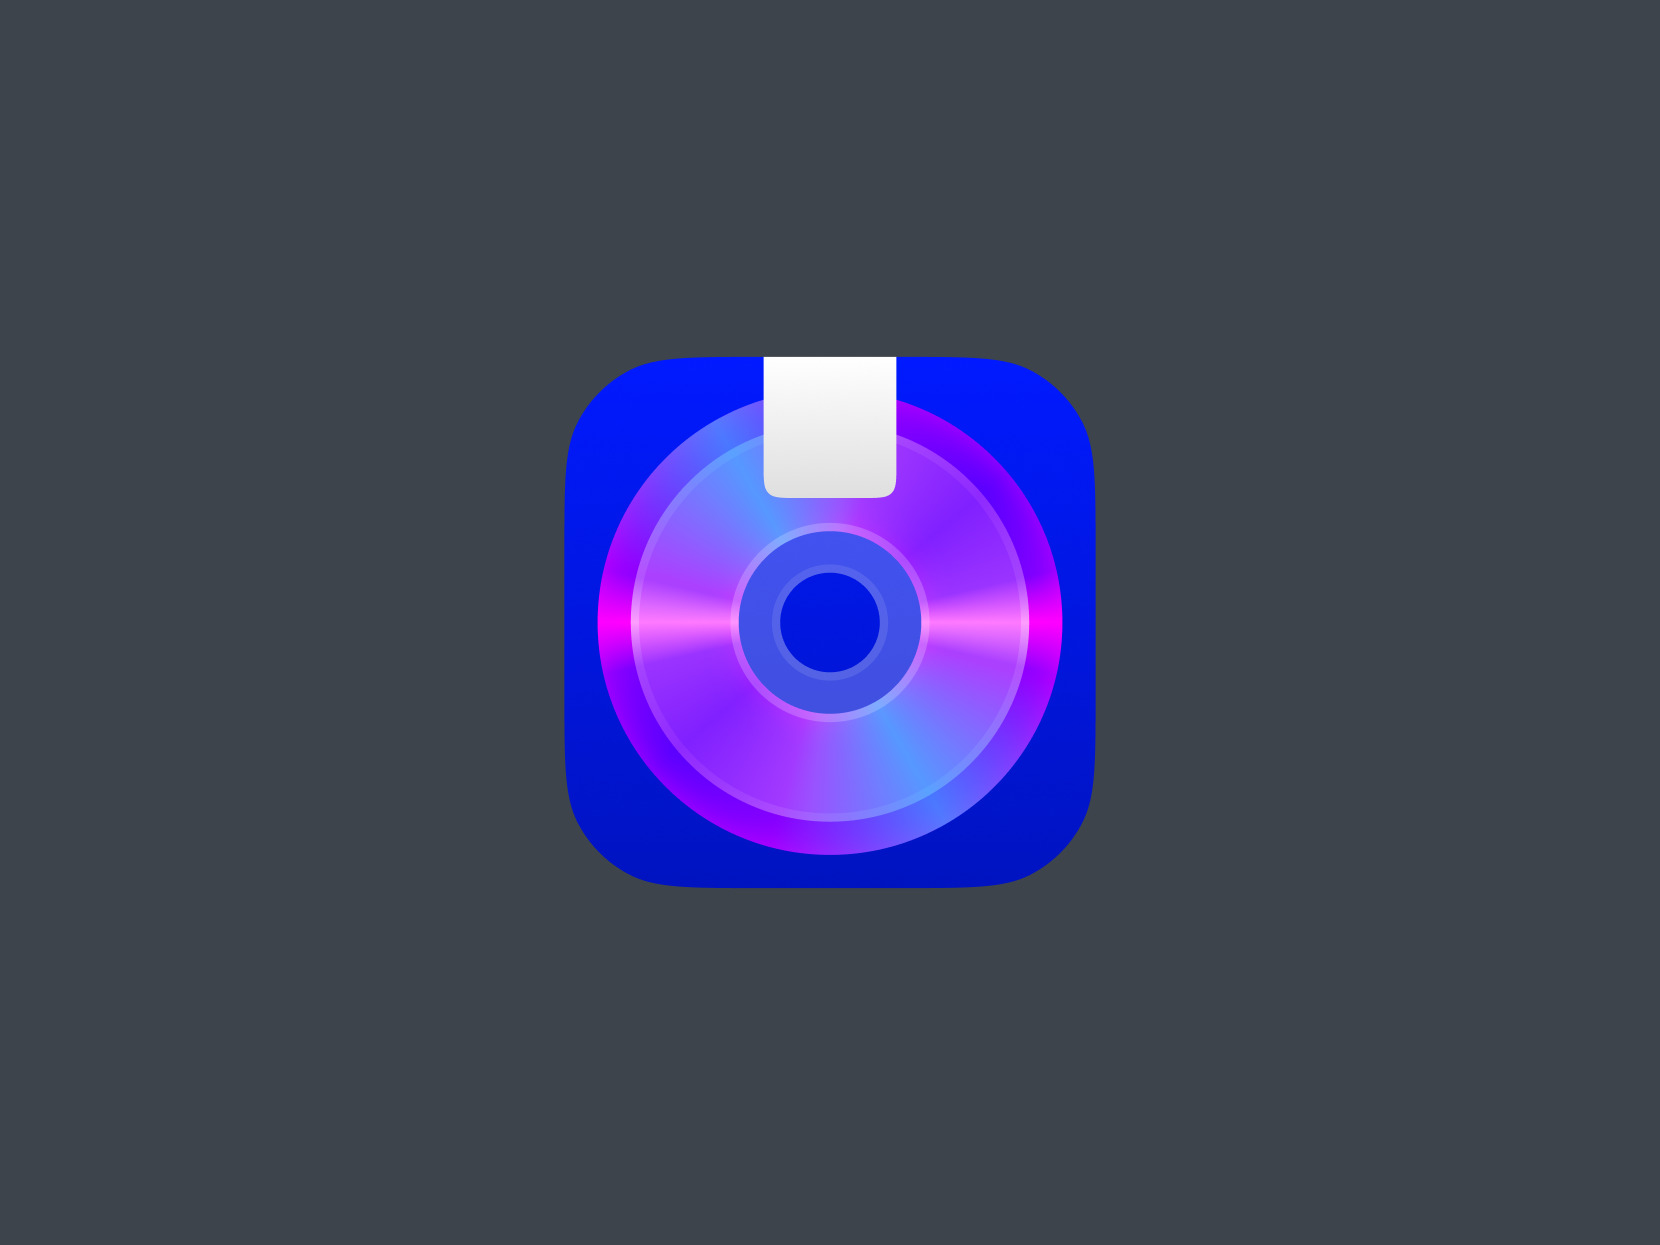 The icon for Savet app